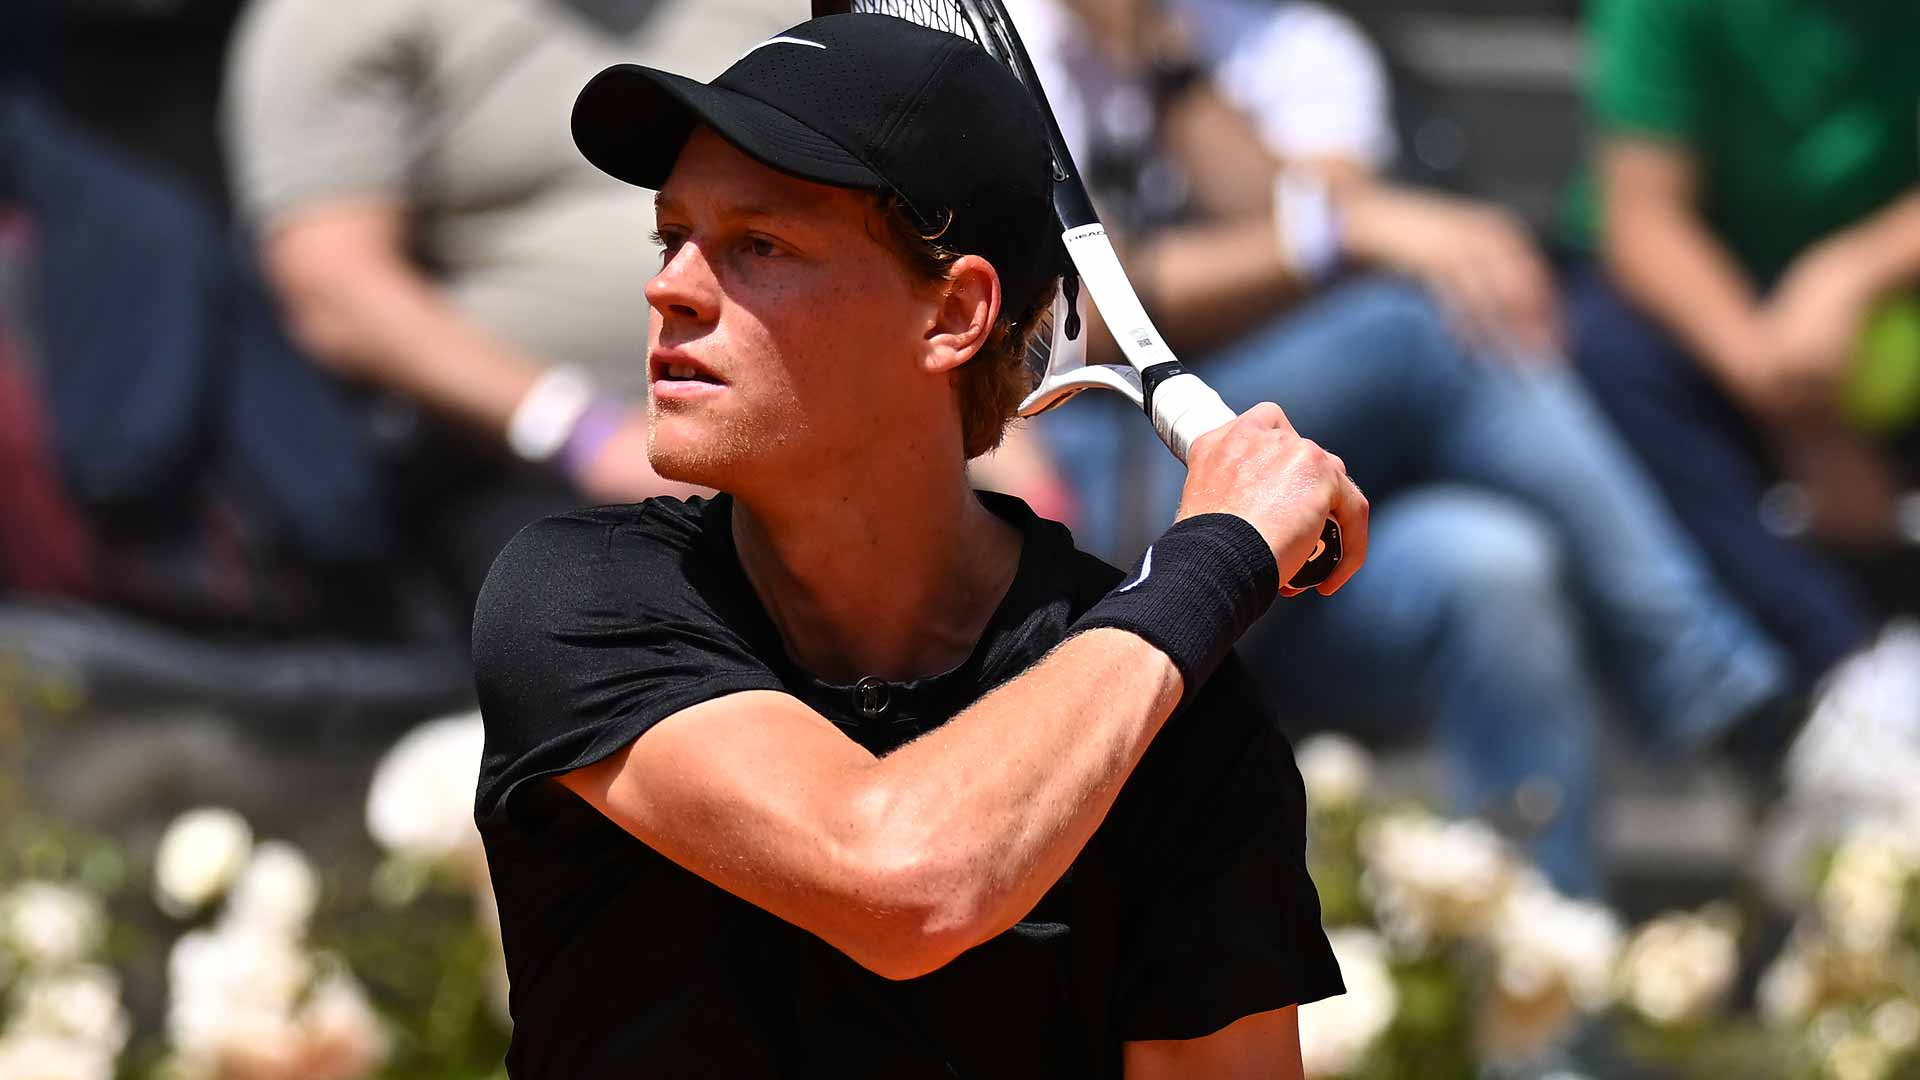 Jannik Sinner is pursuing his first ATP Masters 1000 title in Rome.